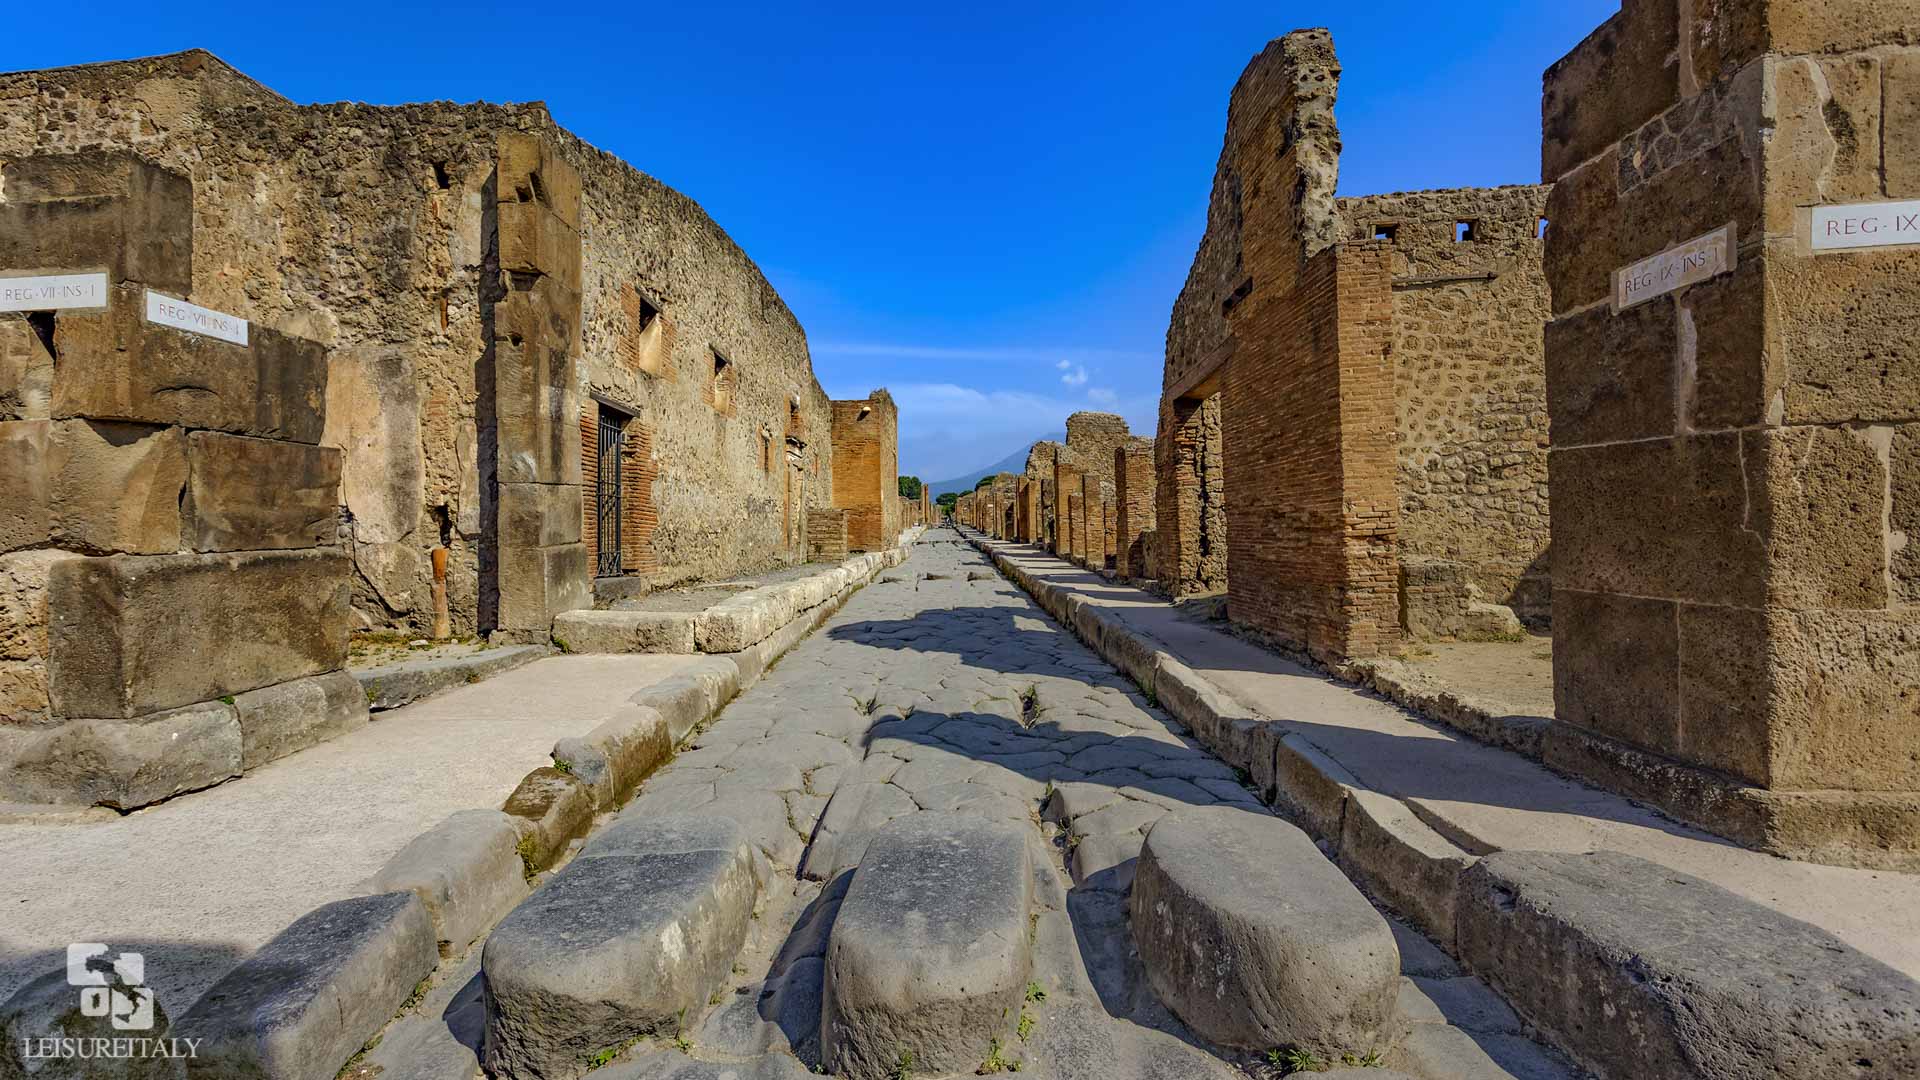  The image shows the ancient Roman cities of Pompeii and Herculaneum, which were destroyed by a volcanic eruption in 79 AD. The temperature difference between the two cities at the time of the eruption is believed to be the reason for the different states of preservation of the two cities.